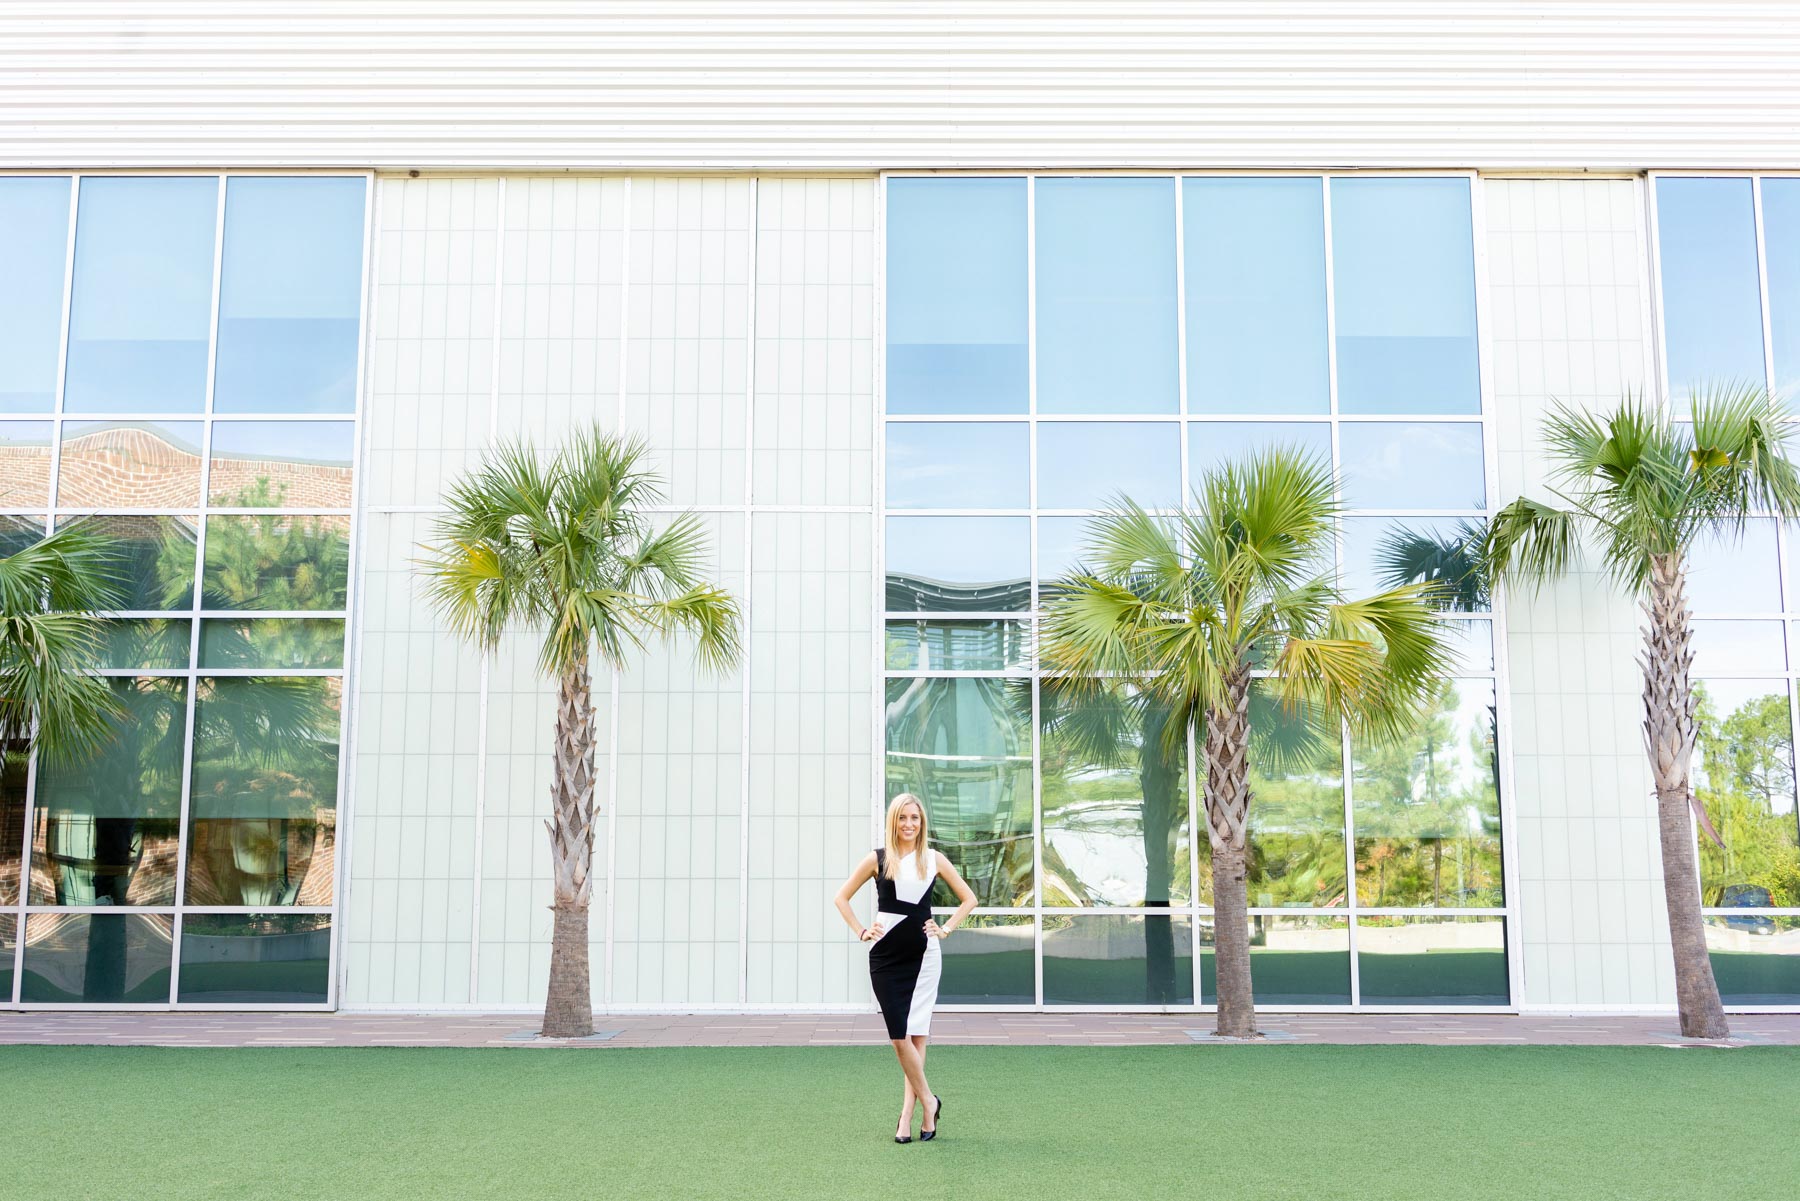 Business portrait of a woman in a black and white dress standing in front of a modern office building with palm trees